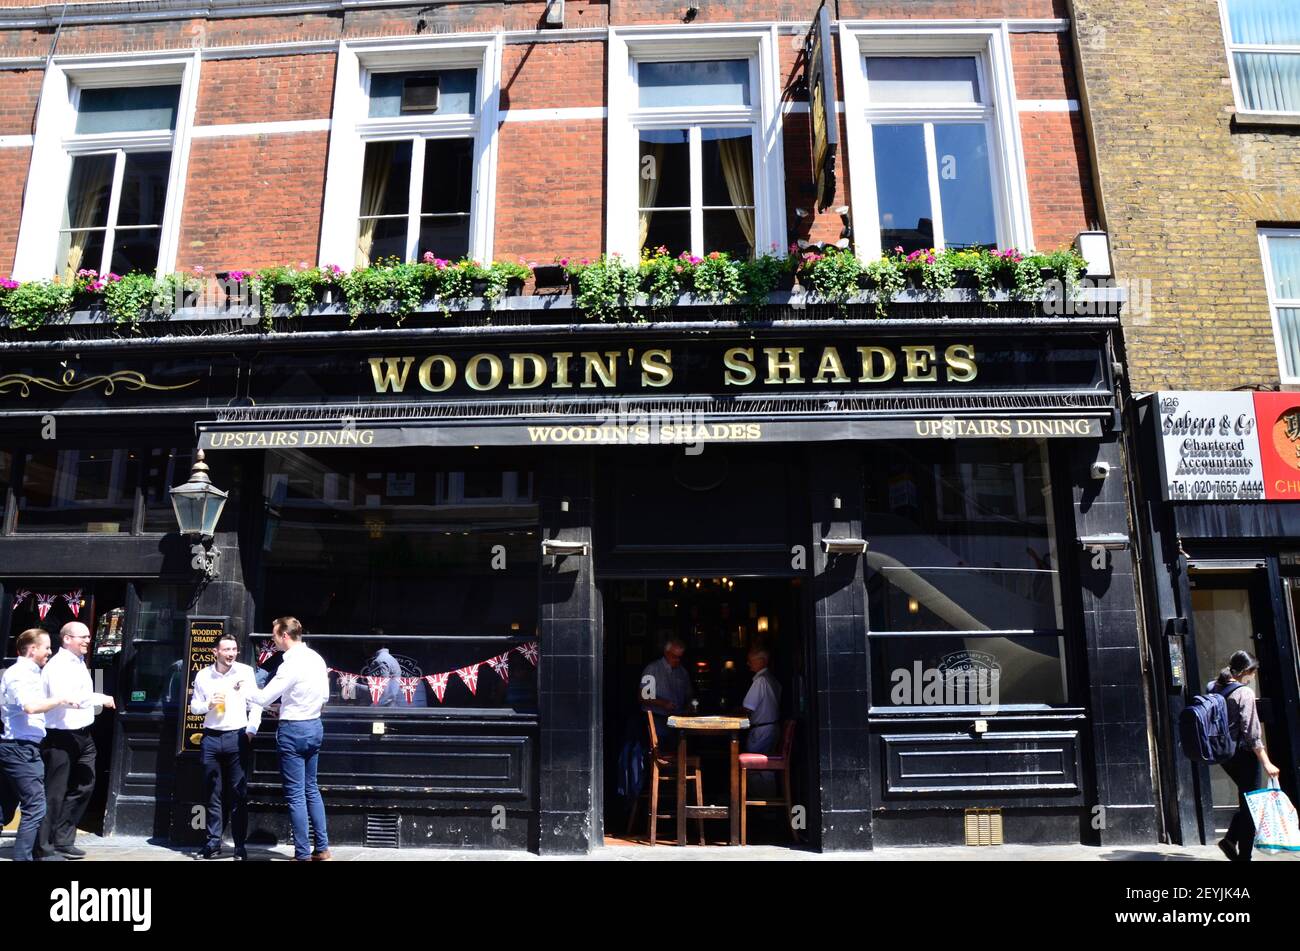 Men chatting outside the Woodin's Shades  pub in London, England Stock Photo